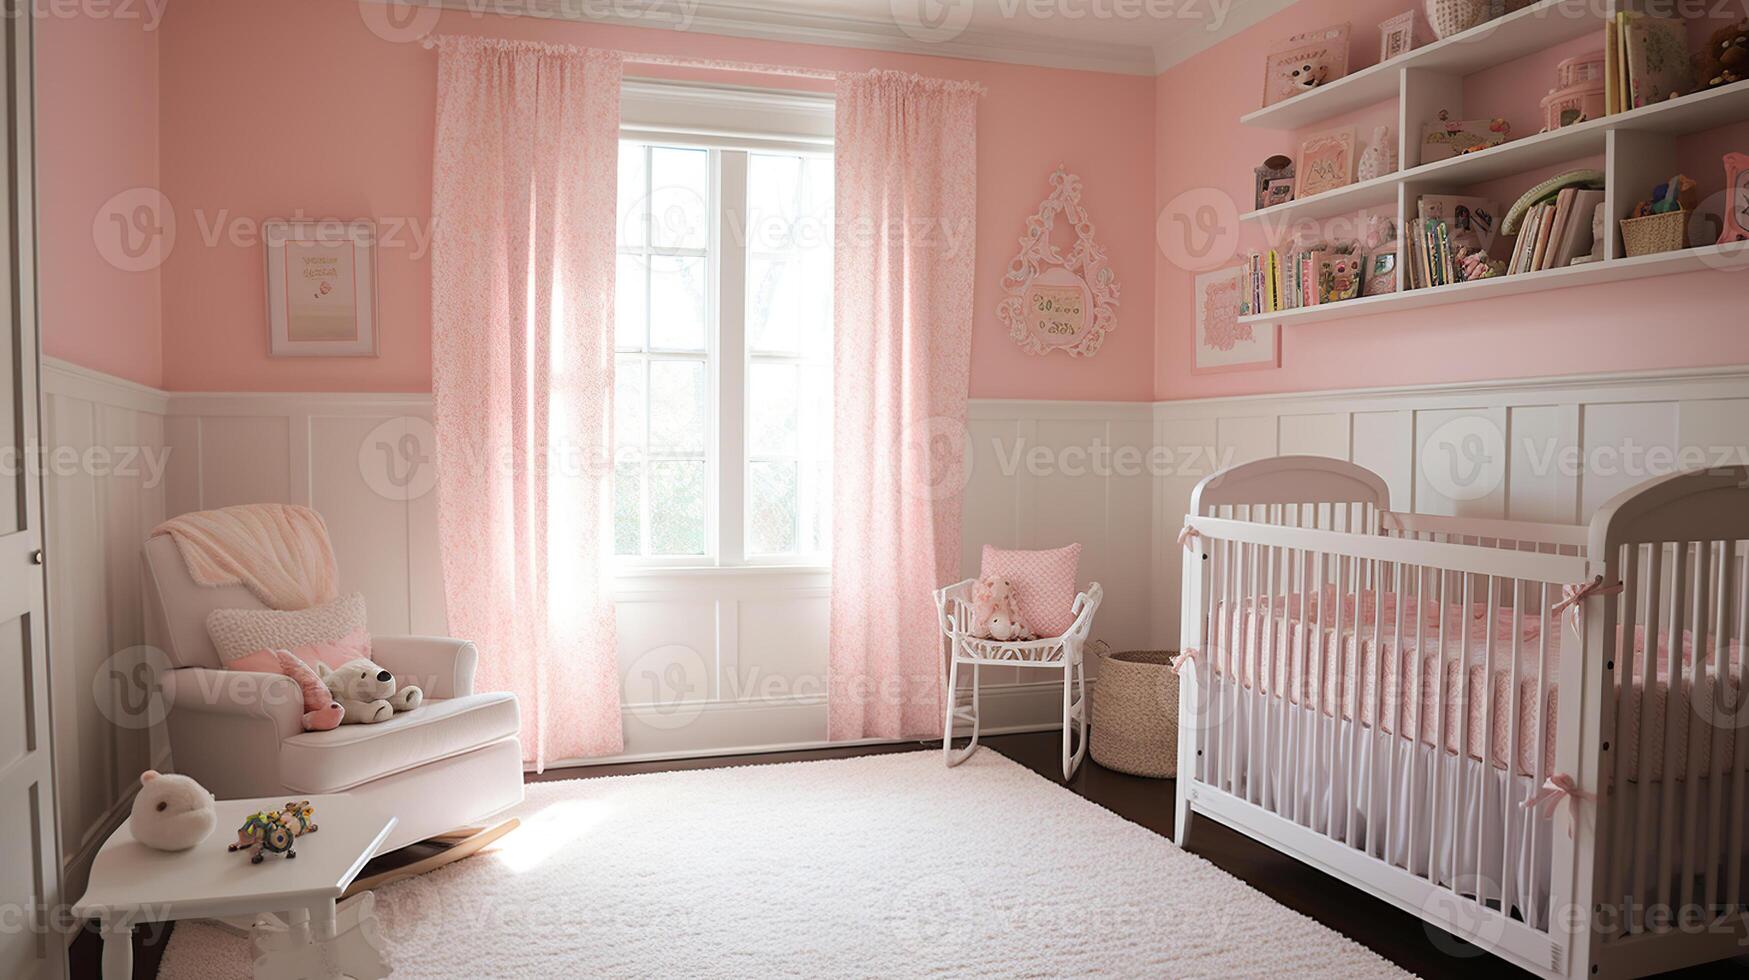 Cozy nursery with light pink walls and white wainscoting, photo